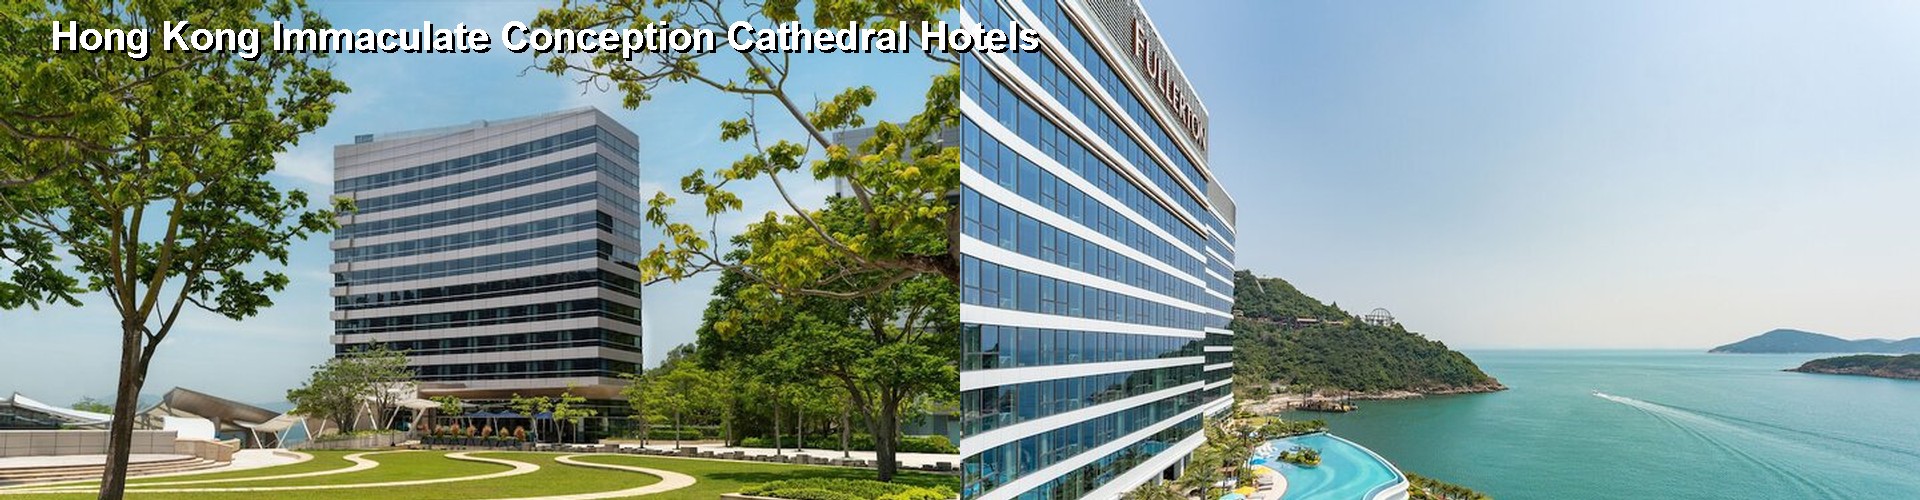 5 Best Hotels near Hong Kong Immaculate Conception Cathedral